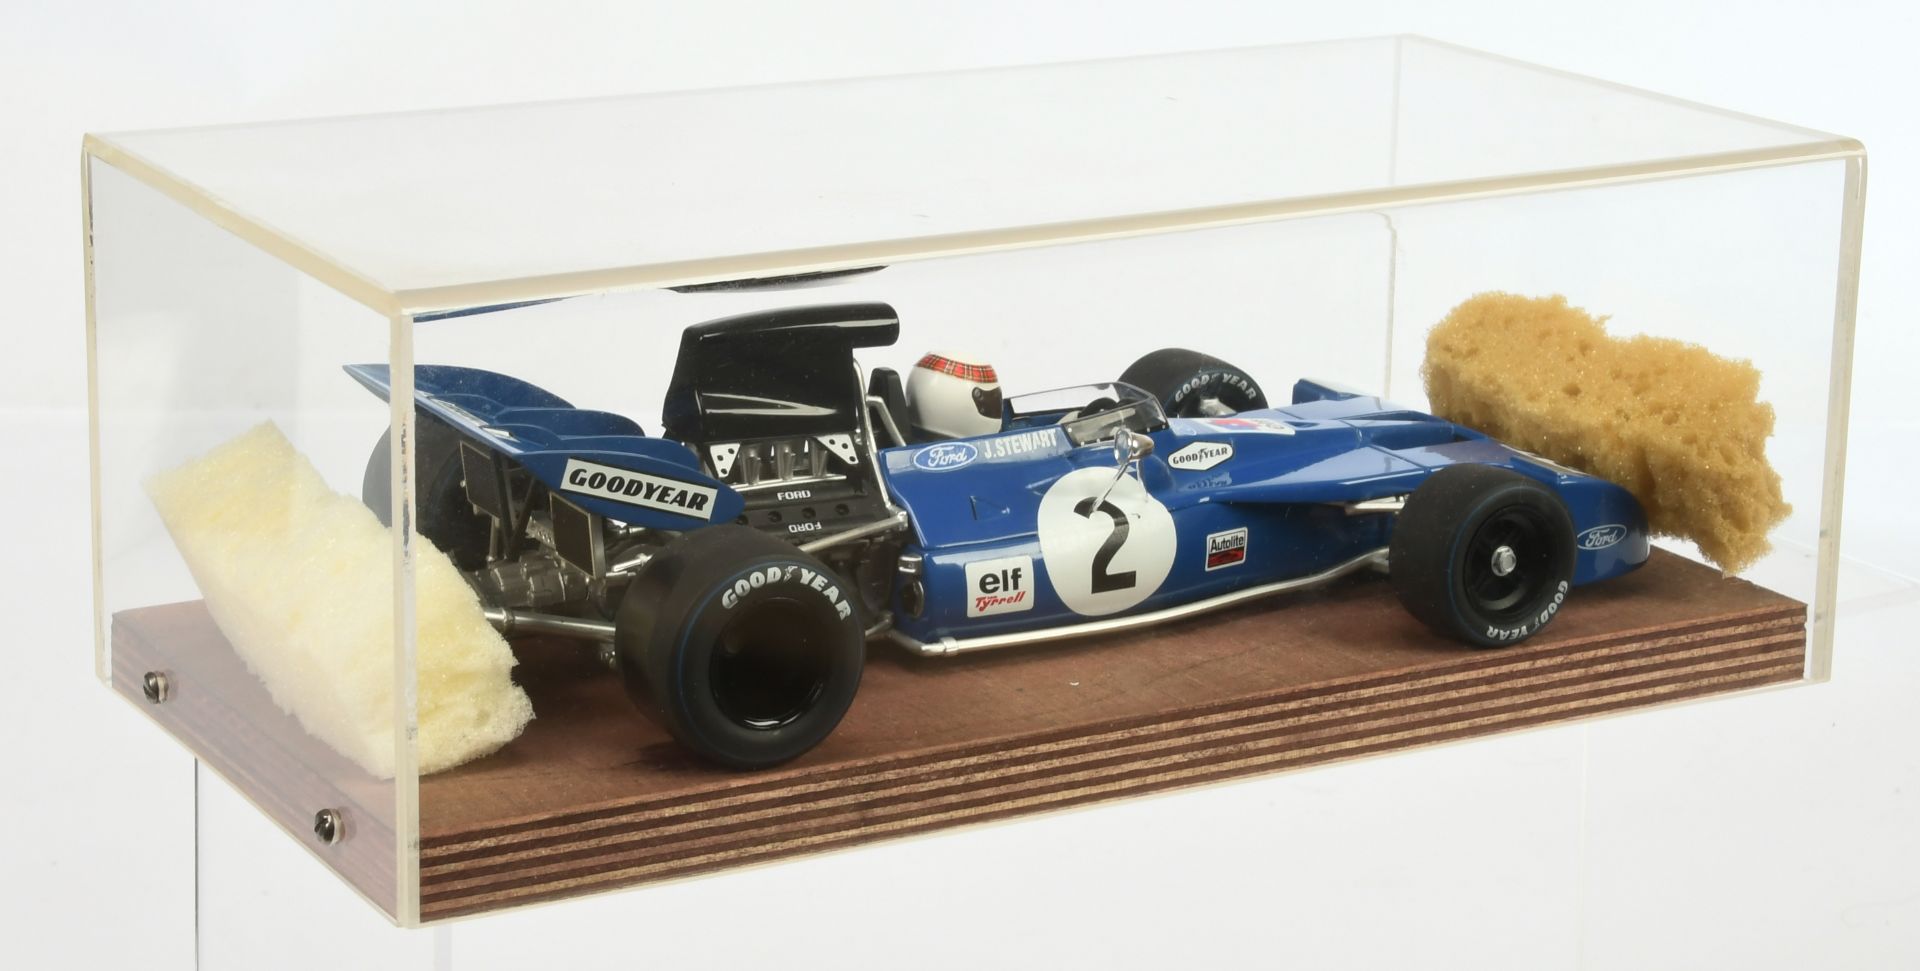 Minichamps racing car with racing number 2 and J. Stewart as a driver,  - Bild 2 aus 2